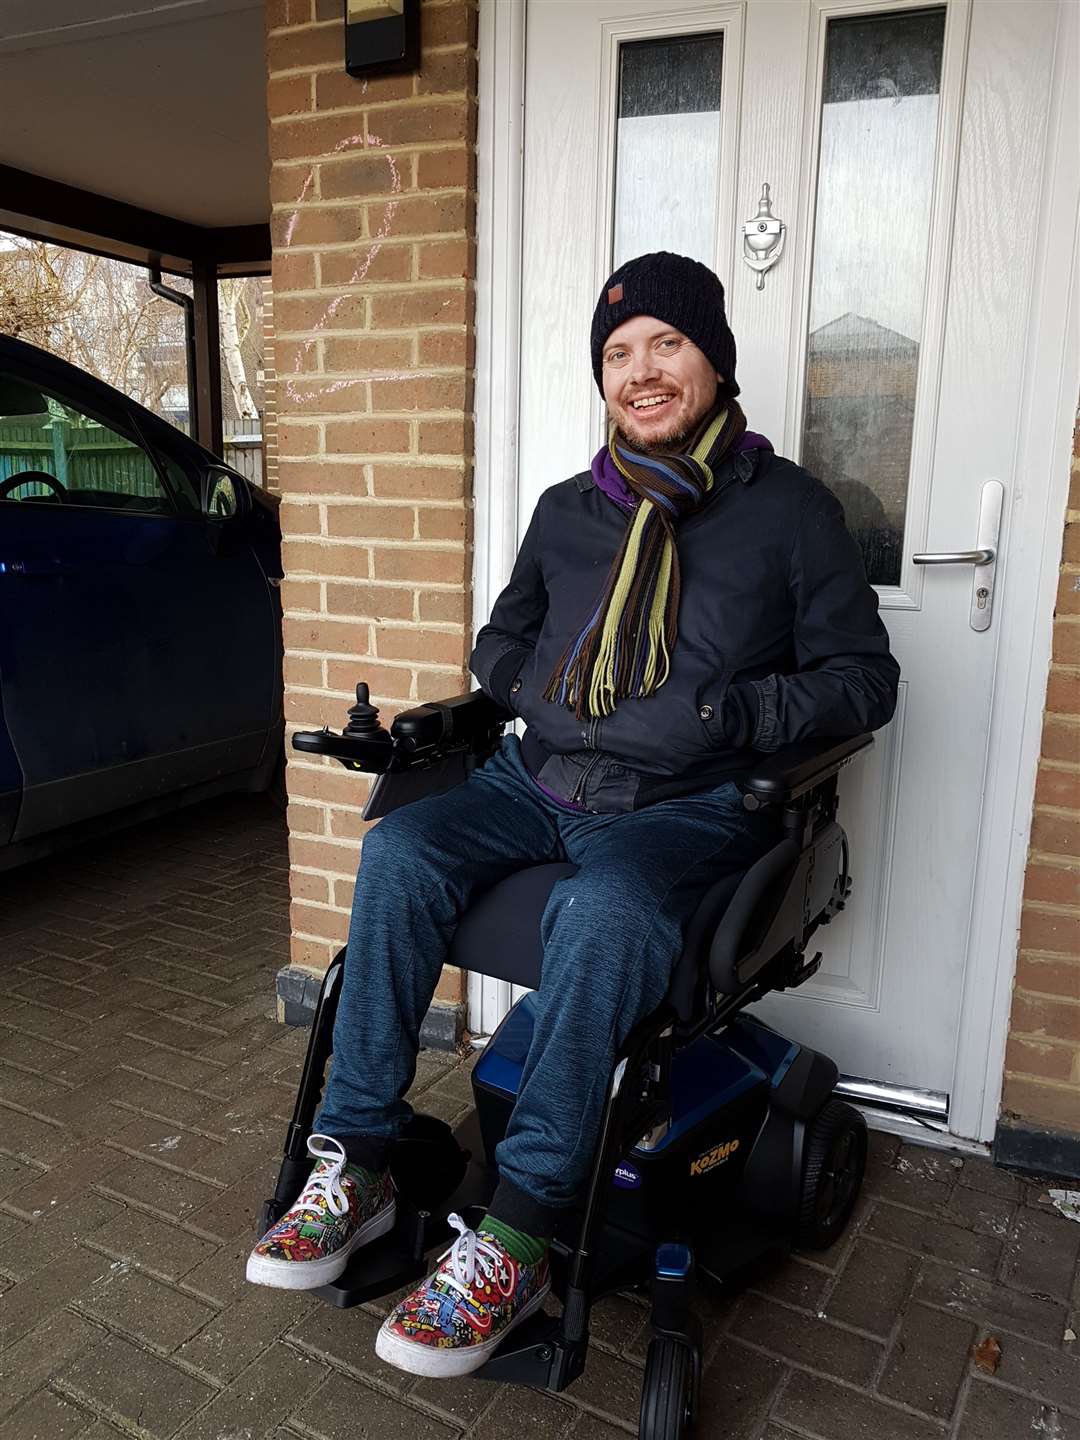 Martyn Kitney from Rochester is appealing to shops to make themselves accessible